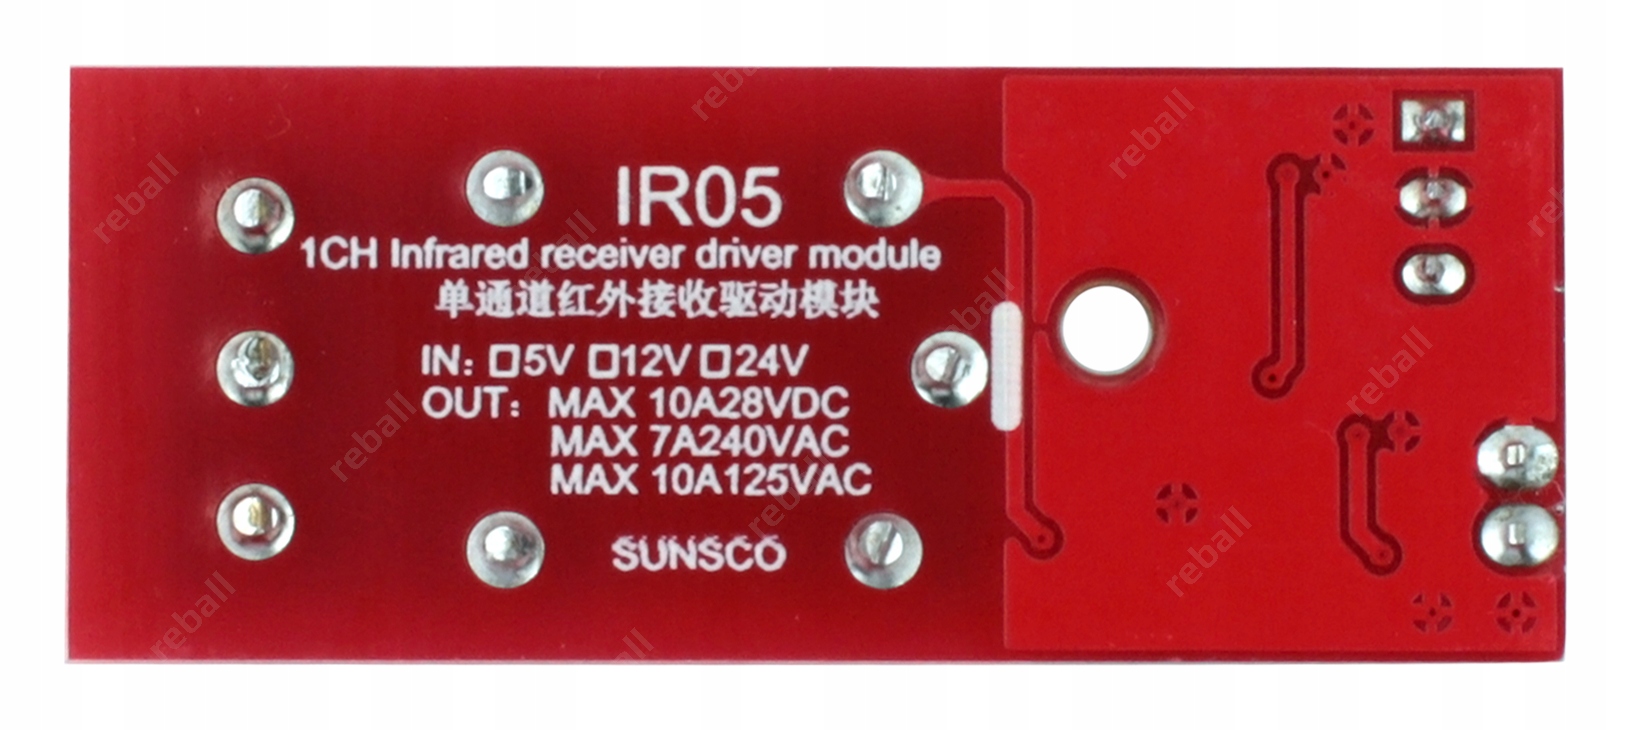 5V RELAY MODULE WITH IR05 REMOTE ARDUINO 10A Manufacturer's code APR0000070